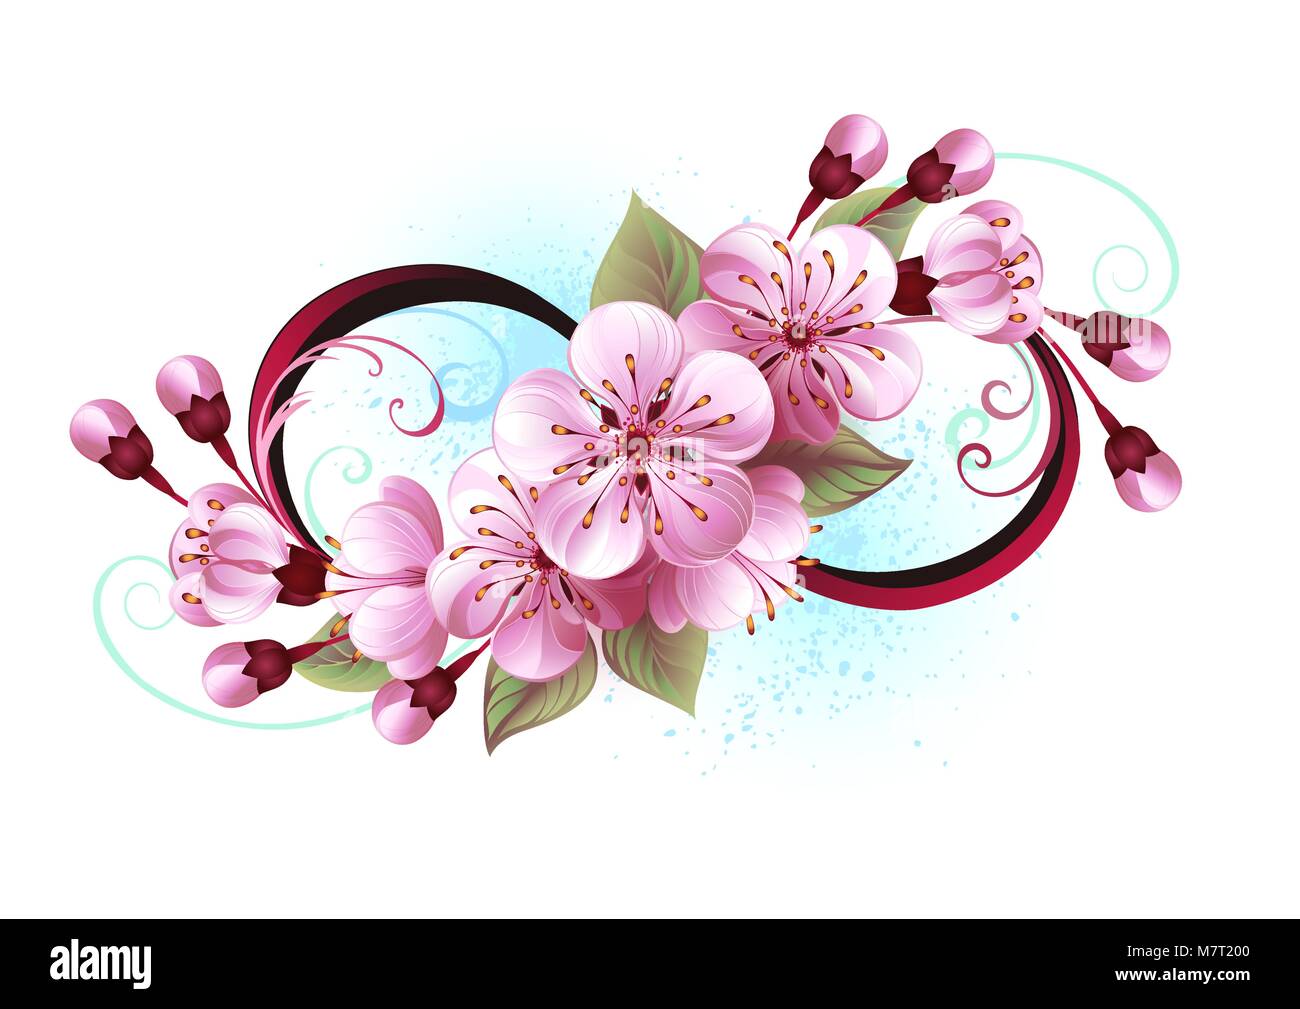 Anime Flower Tattoo Wallpapers - Wallpaper Cave